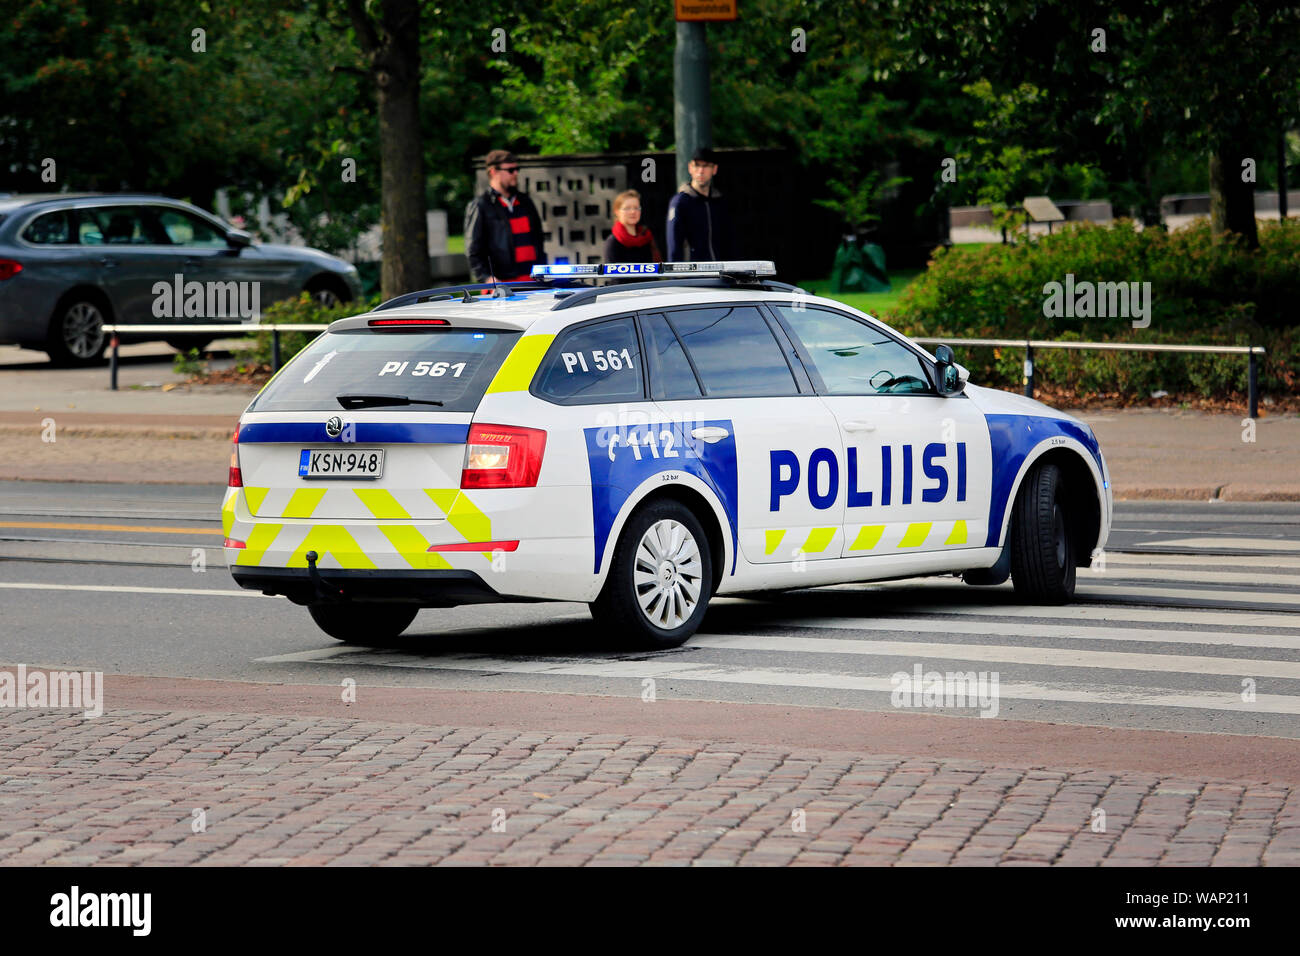 Helsinki, Finland. August 21, 2019. Police officers and vehicles in central Helsinki on the day of Russian President Vladimir Putin's visit. Credit: Taina Sohlman/Alamy Live News Stock Photo